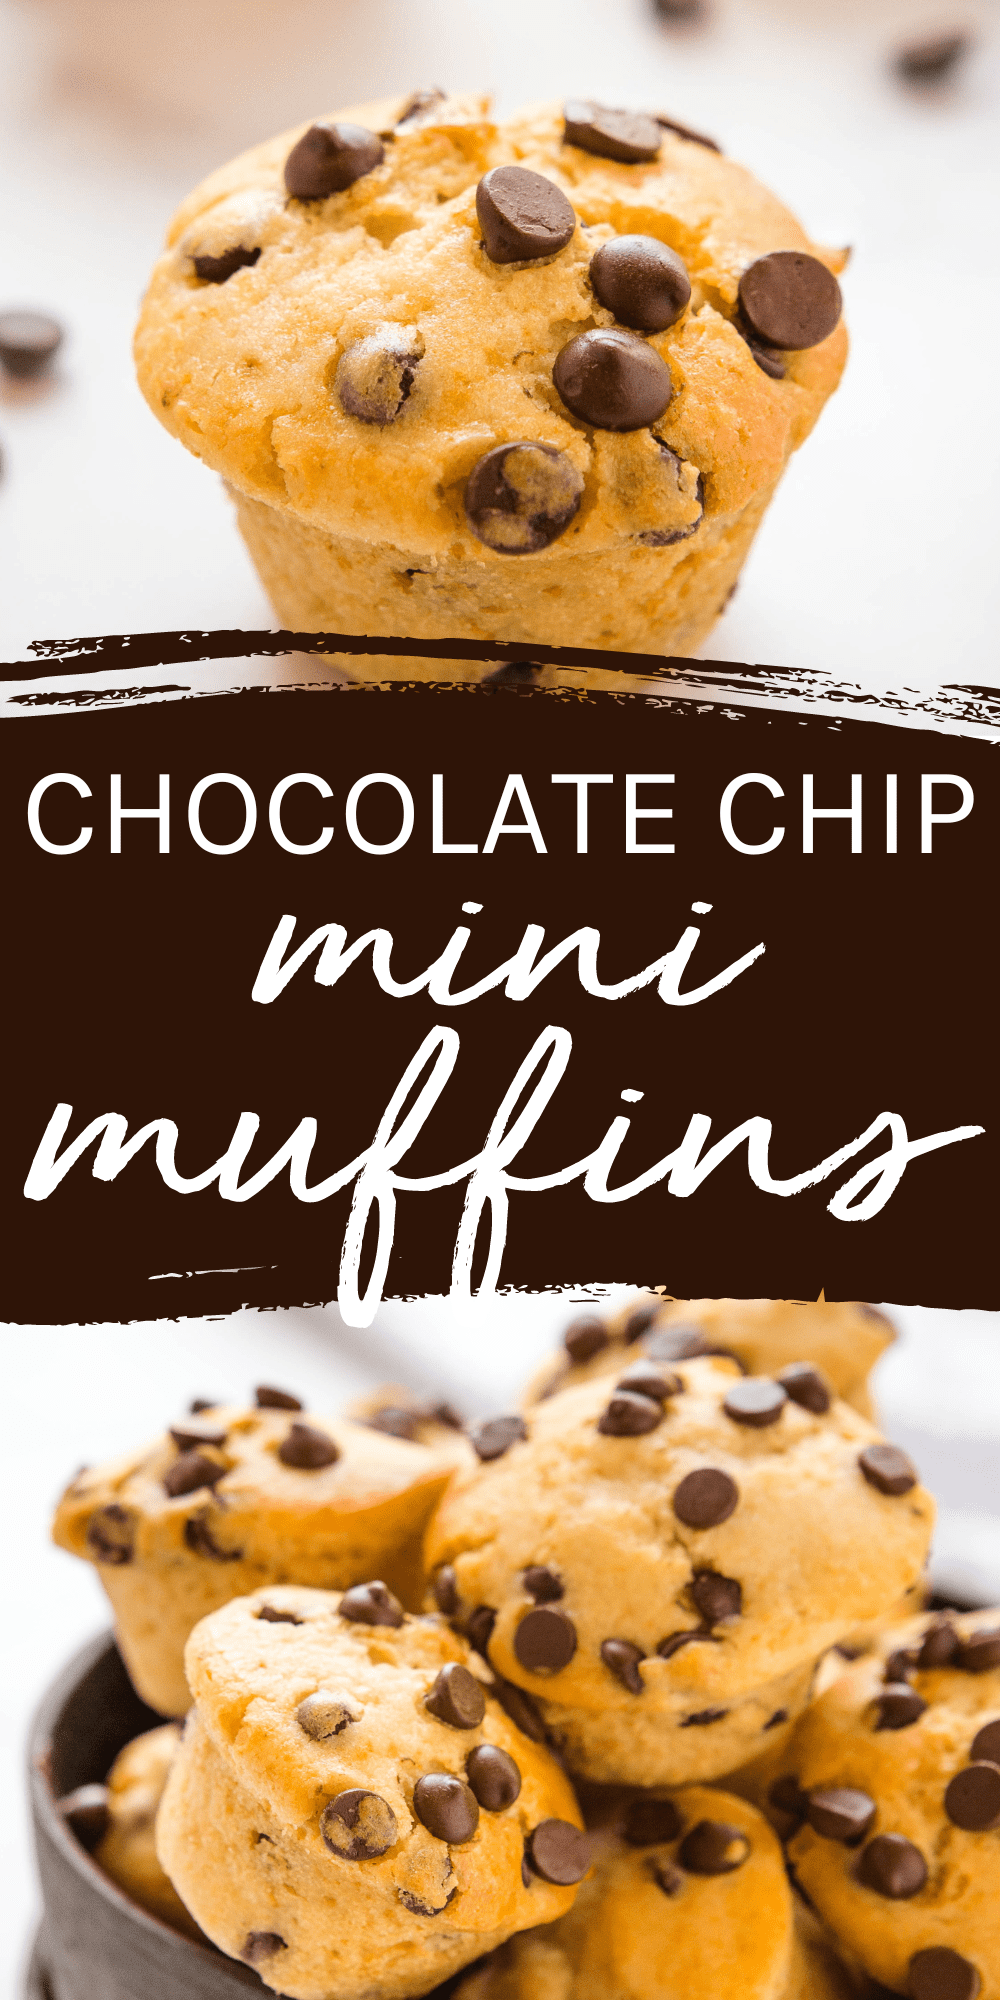 These Chocolate Chip Mini Muffins are the perfect two-bite sweet treat - soft and tender on the inside, perfectly caramelized on the outside and packed with melty chocolate chips. Recipe from thebusybaker.ca! #chocolatechipmuffins #minimuffins #minimuffinsrecipe #howtomakeminimuffins #chocolatechips #sweet #treat #muffinstutorial #bakingtutorial #bakingtips via @busybakerblog